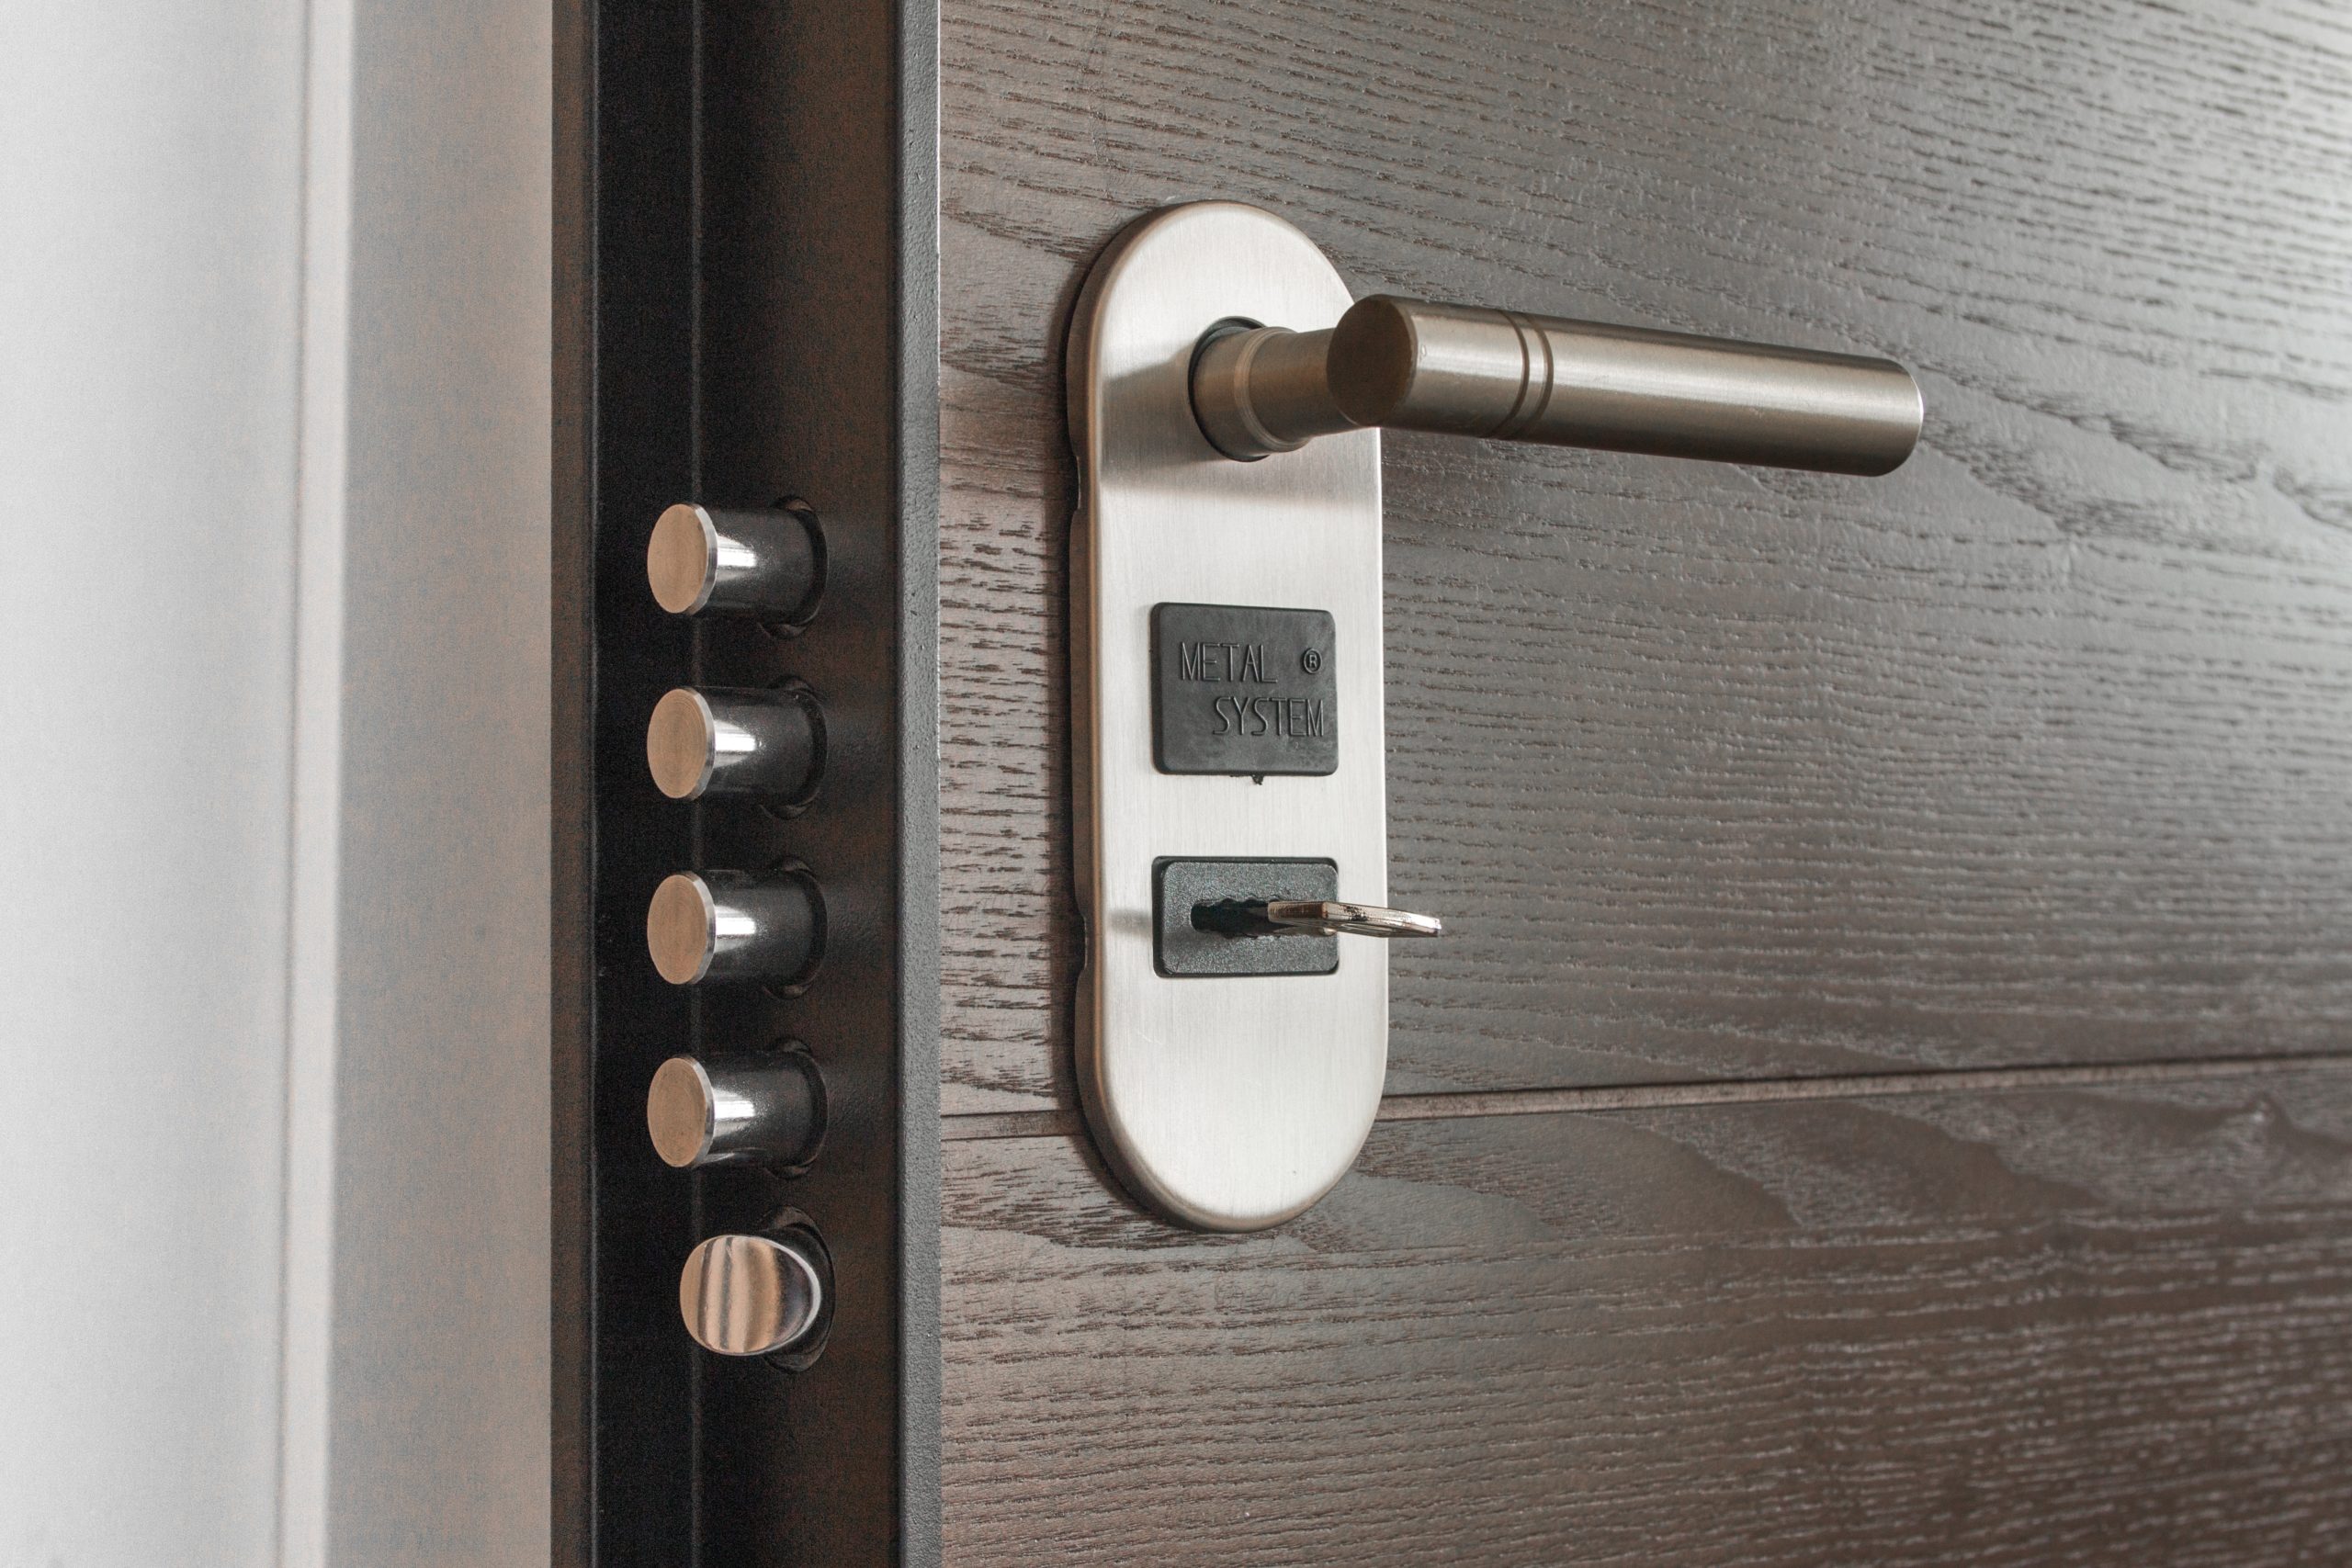 How to find a good locksmith - Yelp